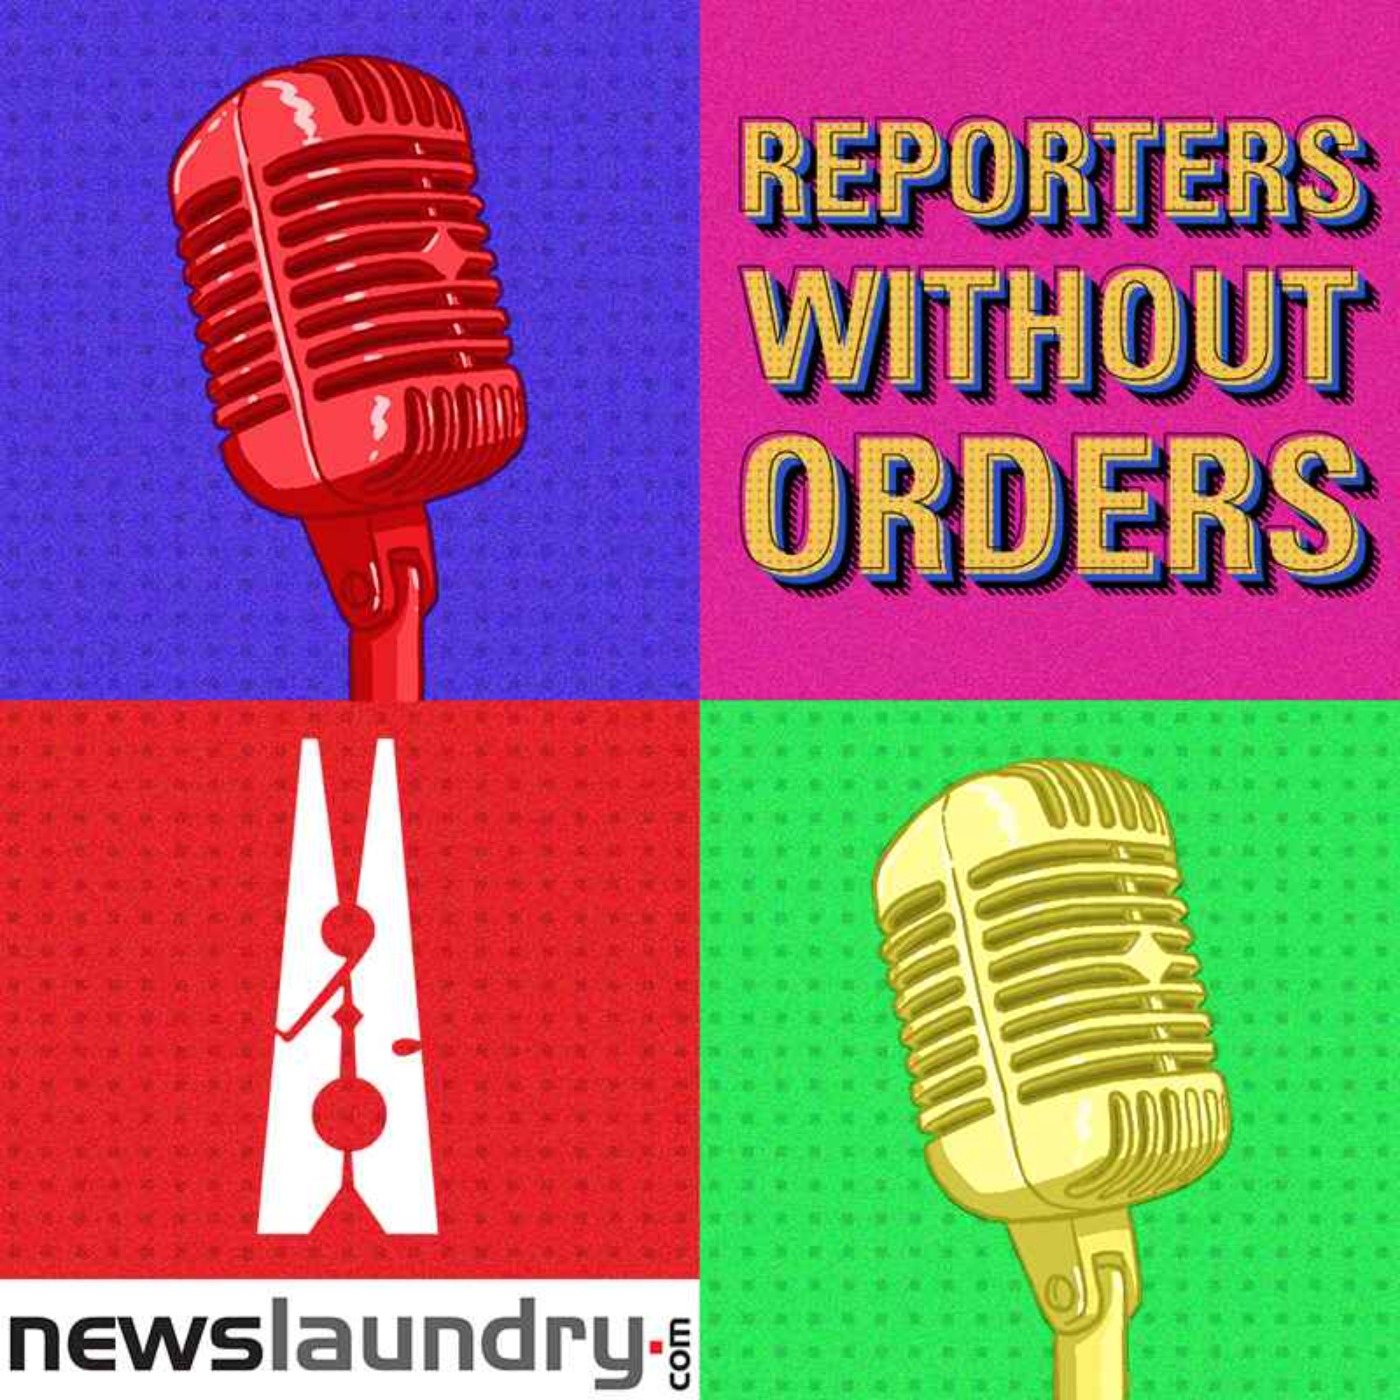 Reporters Without Orders Ep 300: The challenges of being a reporter in India